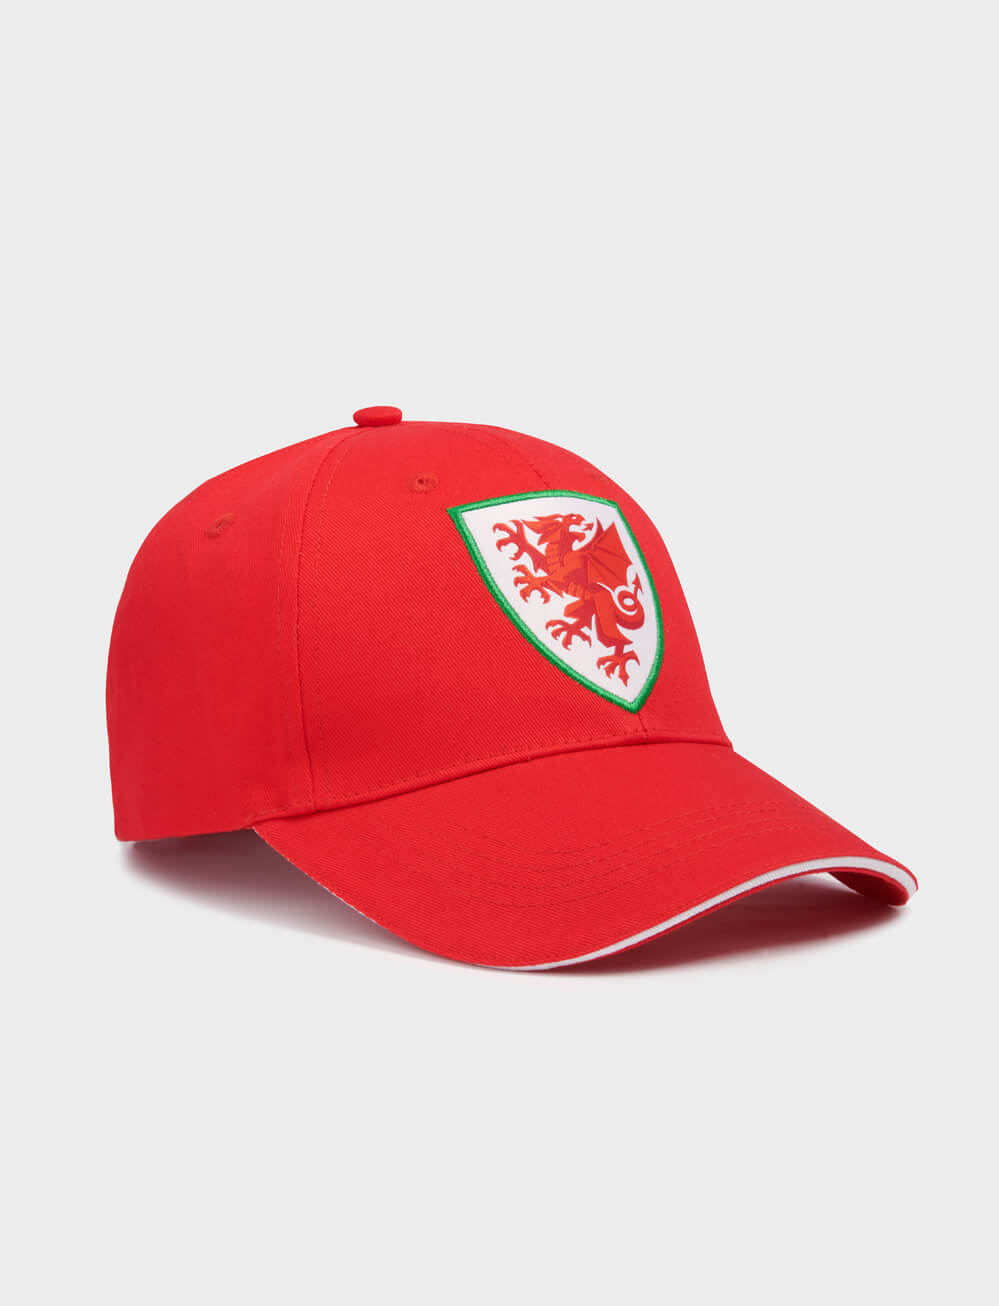 Official Team Wales Cap - Red - The World Football Store